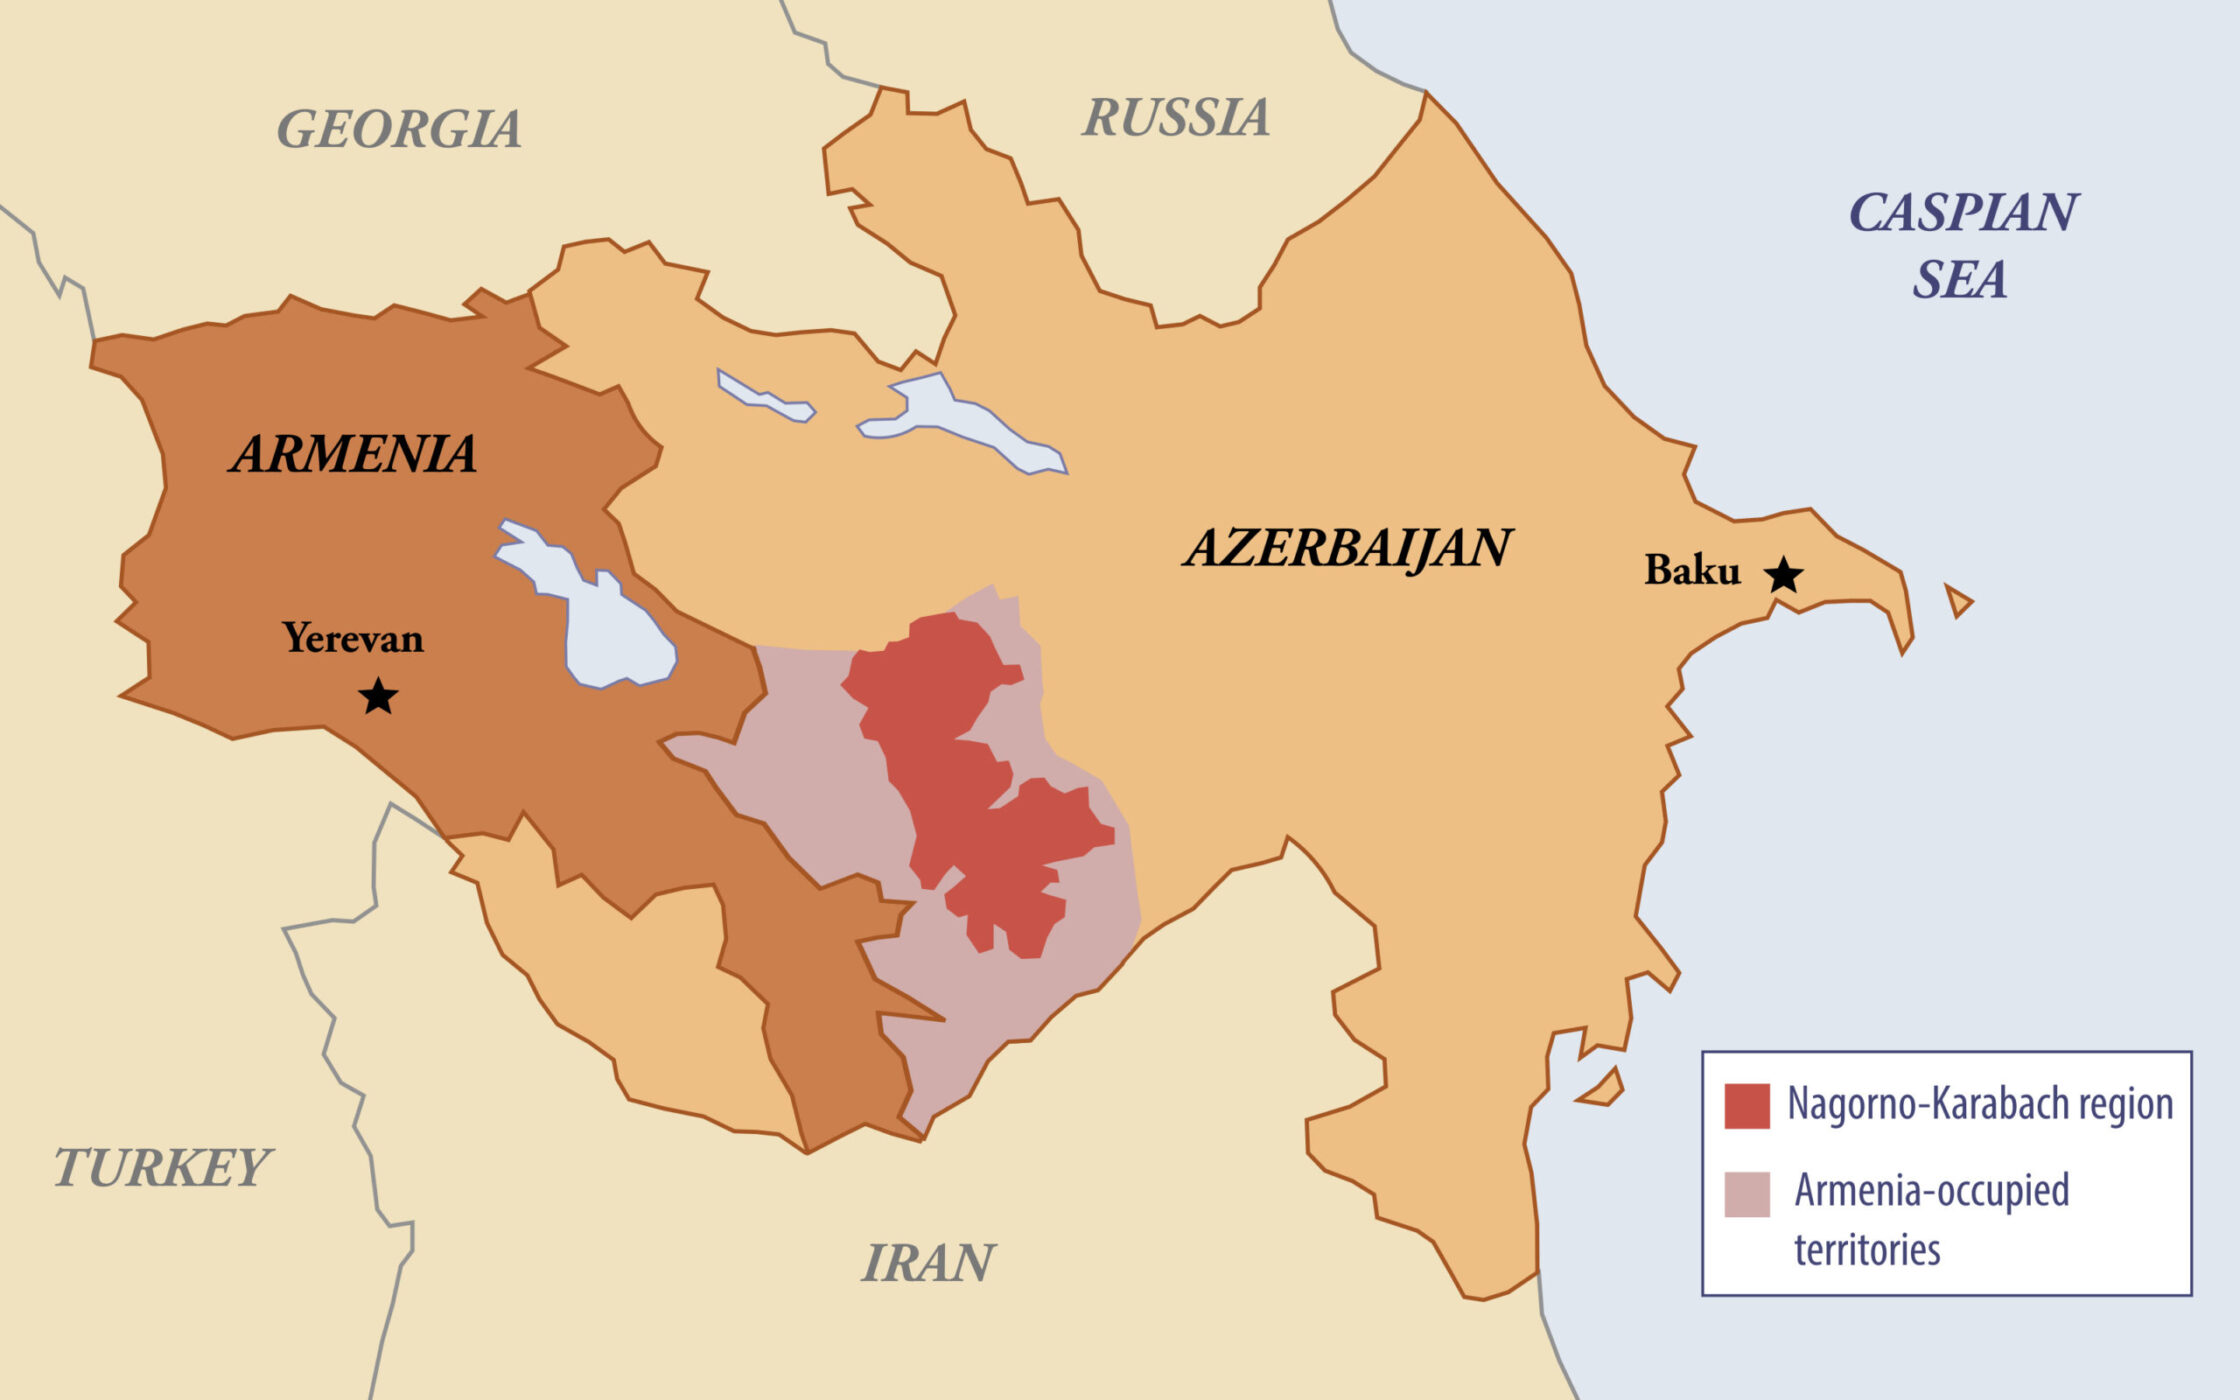 Azerbaijan's victory over Armenian enclave raises fears of another war